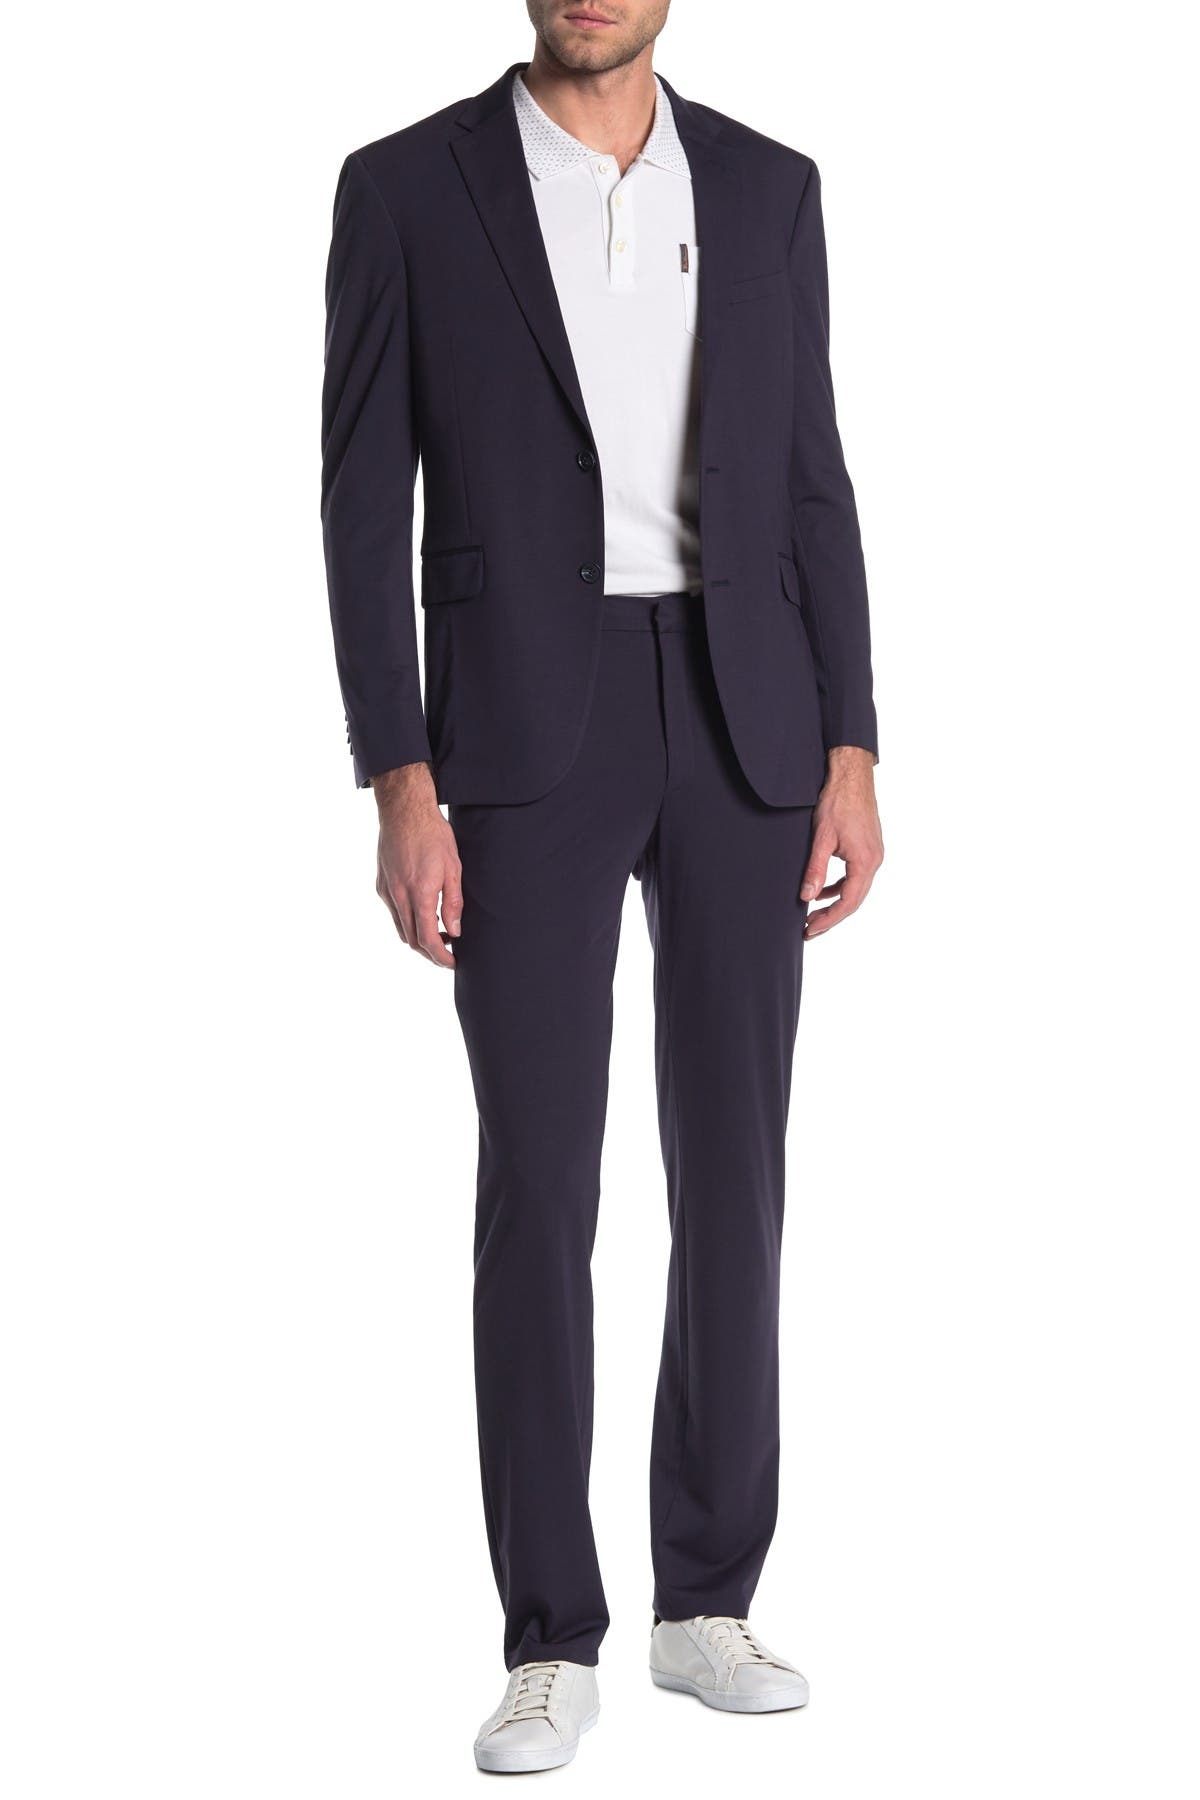 Kenneth Cole Reaction | Sharkskin Two Button Slim Fit Suit | Nordstrom Rack